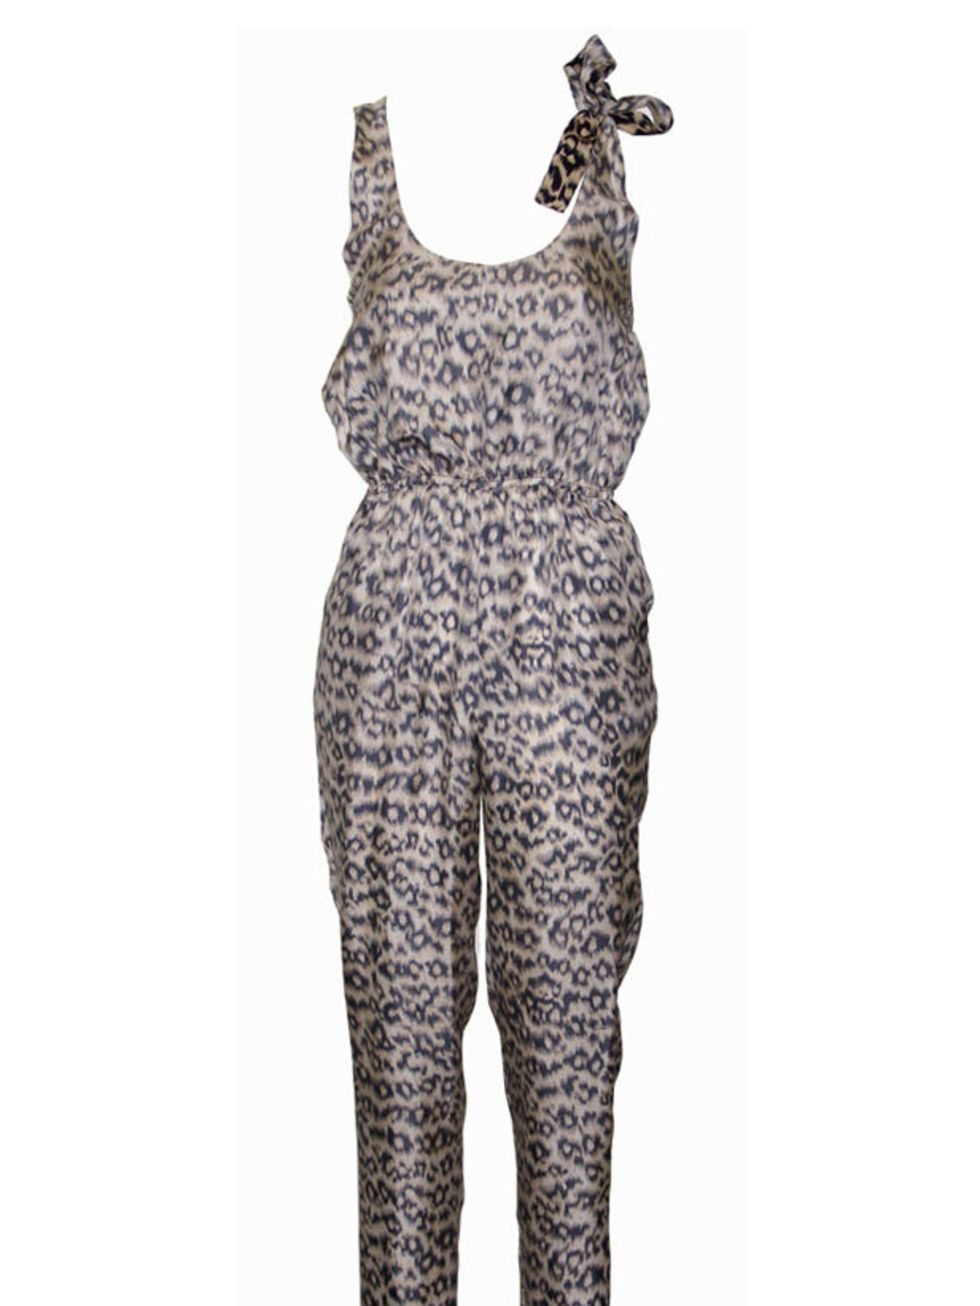 <p>Leopard print jumpsuit, £295, by Sea NY at <a href="http://www.o2oxygen.com/products/327/56/sea_ny_leopard_jumpsuit/">Oxygen Boutique</a> </p>